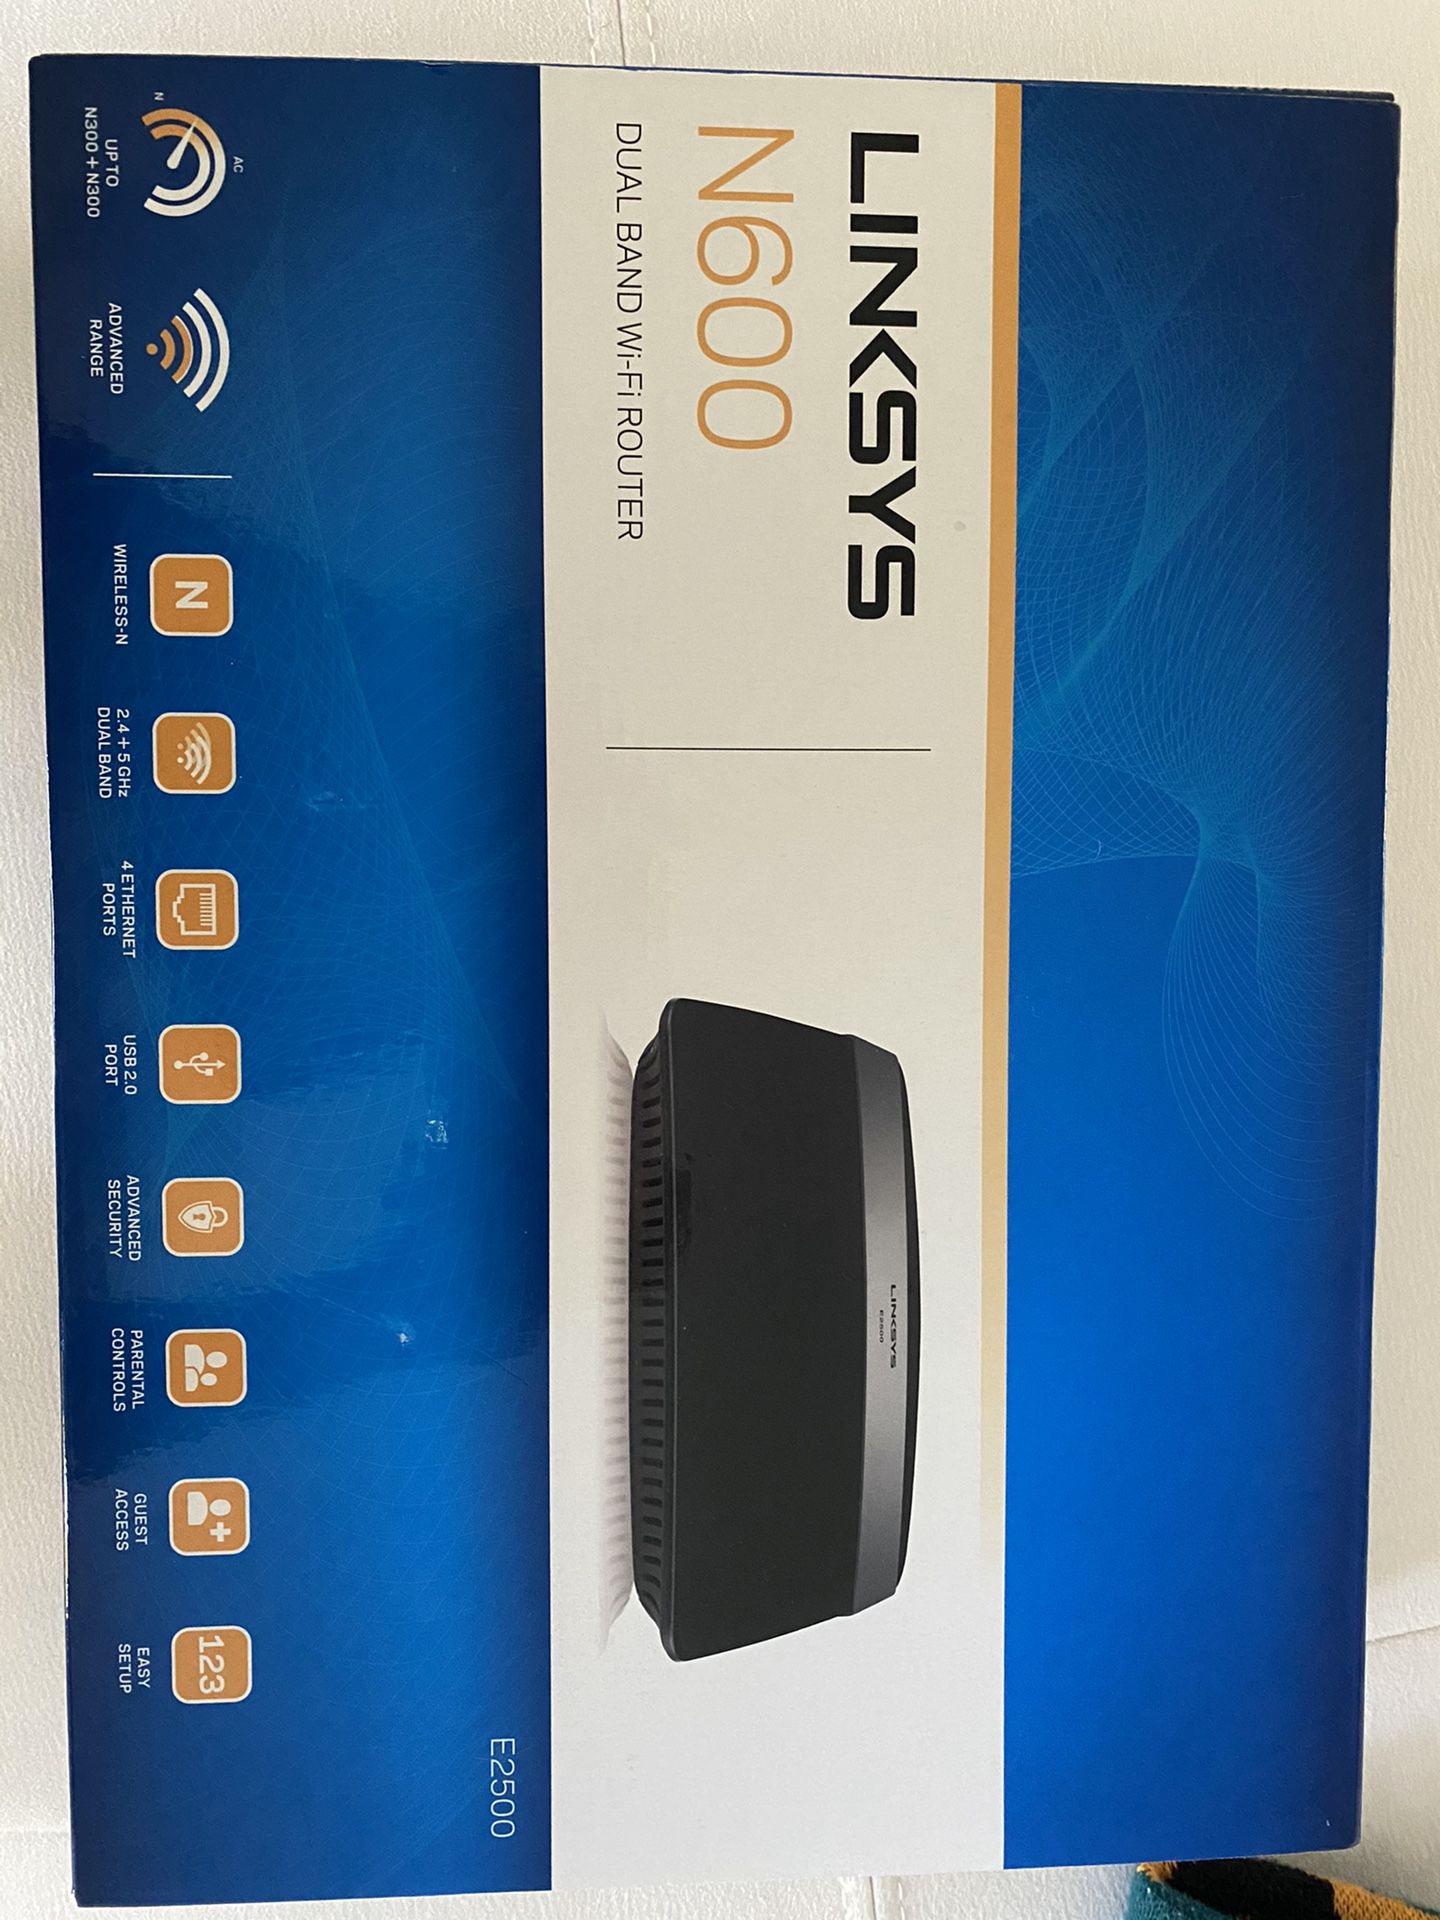 Linksys N600 Wifi Router